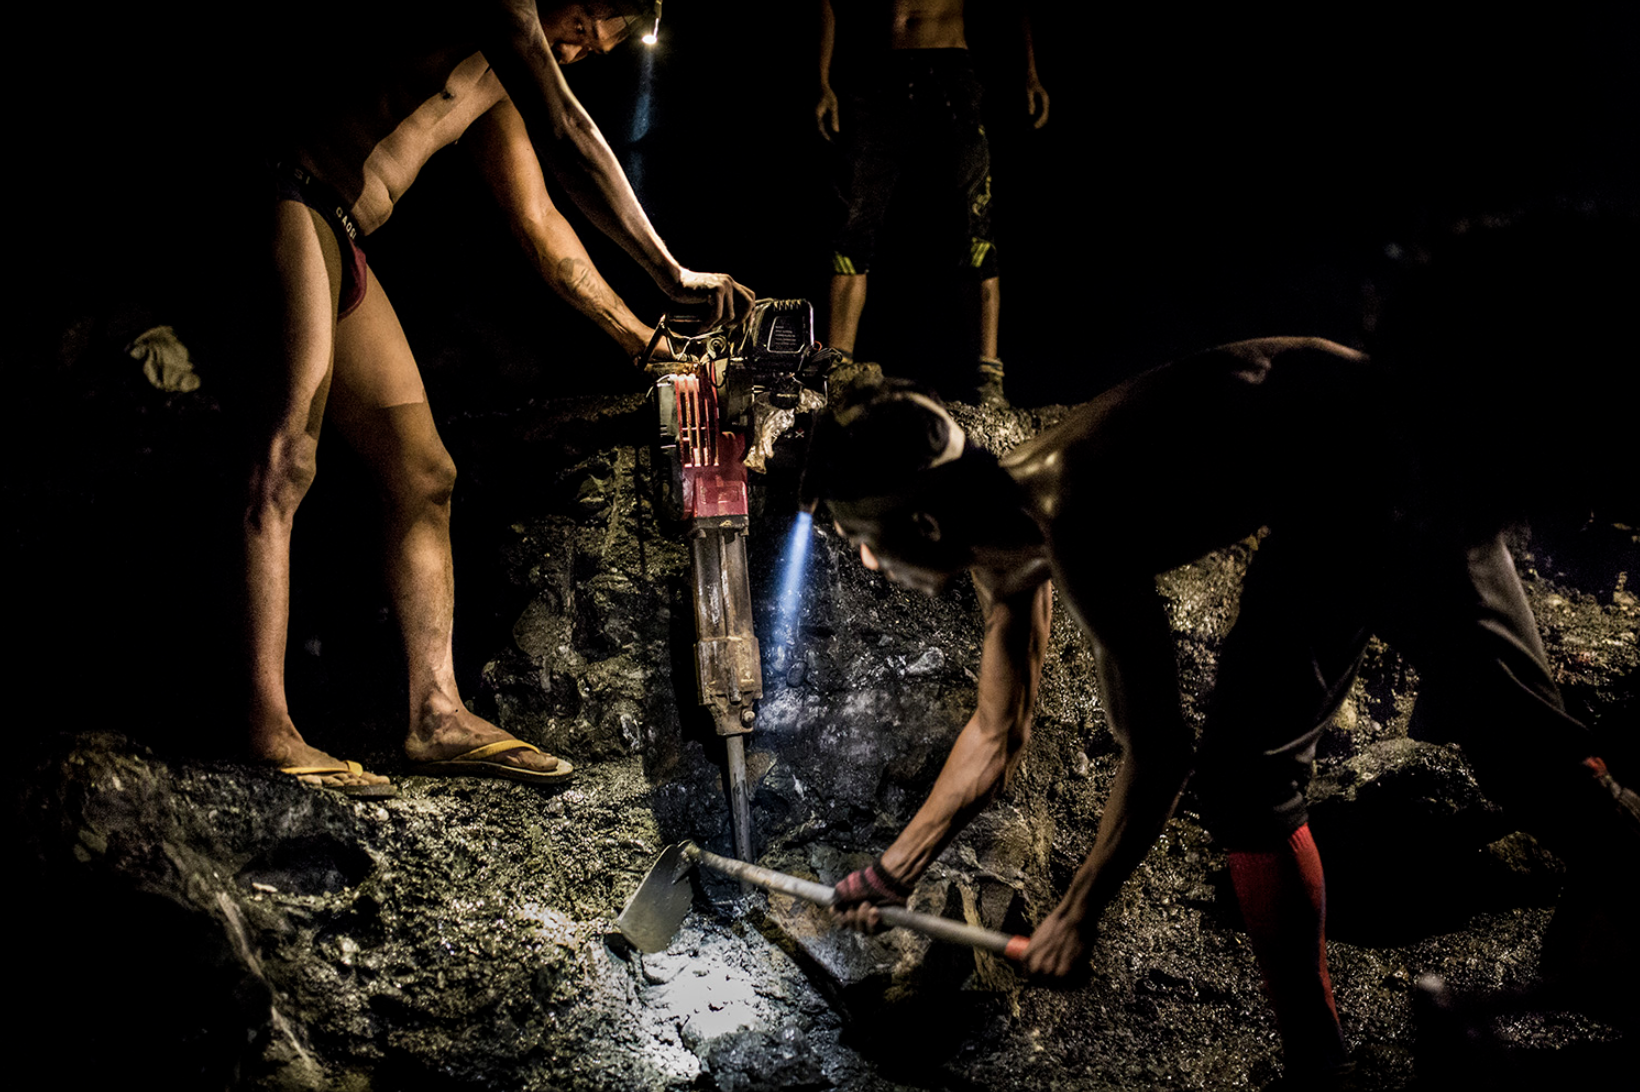 Miners use jackhammers and headlamps to search for jade at night in Hpakant on Aug. 15, 2018. Image by Hkun Lat. Myanmar, 2018. 